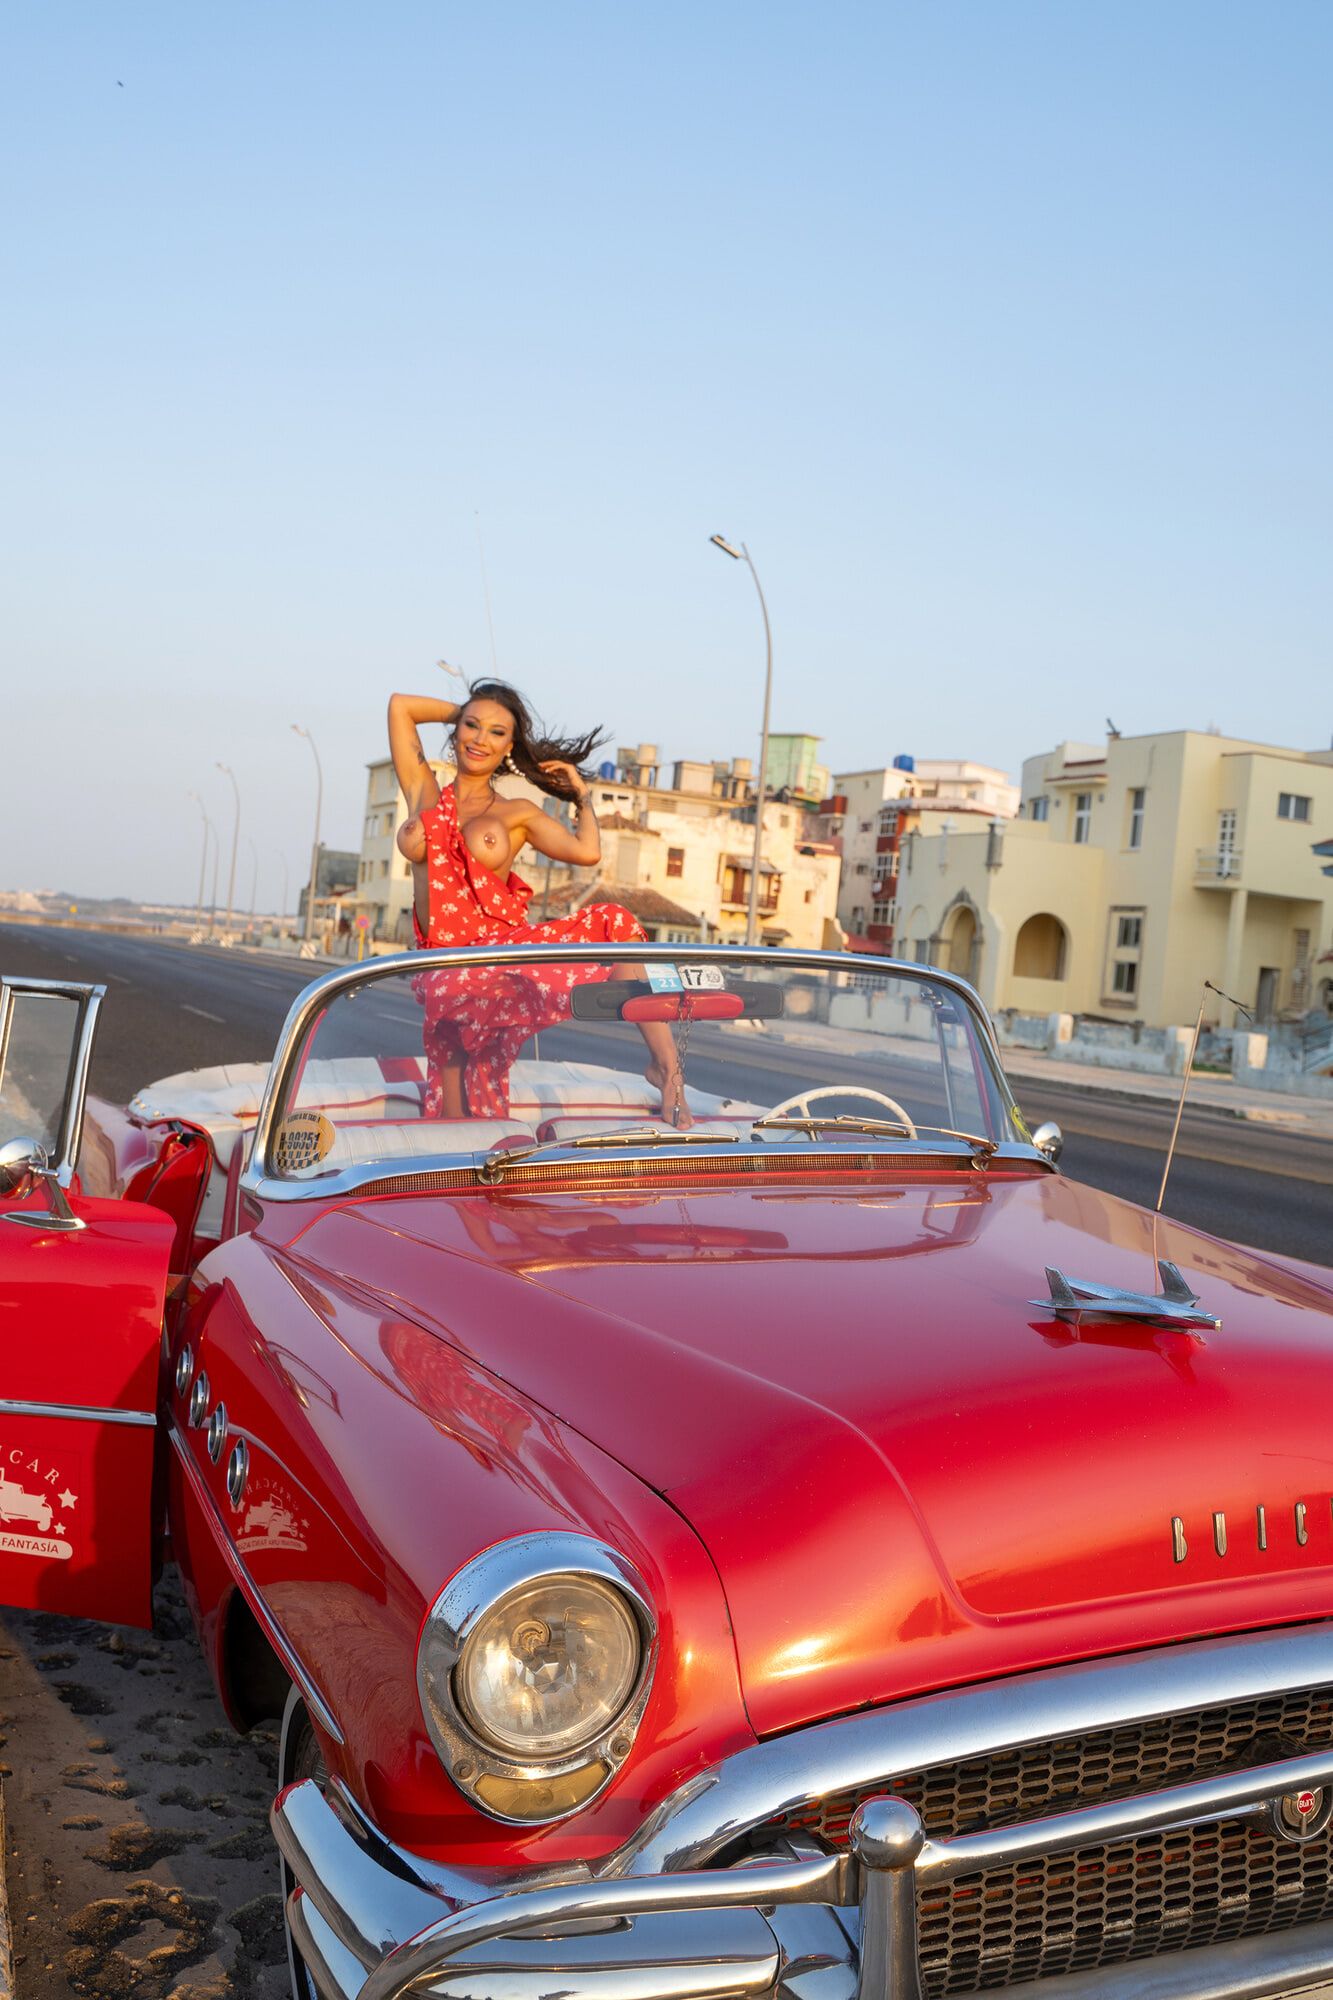 Monika Fox In Red Dress On Waterfront In Rare Car